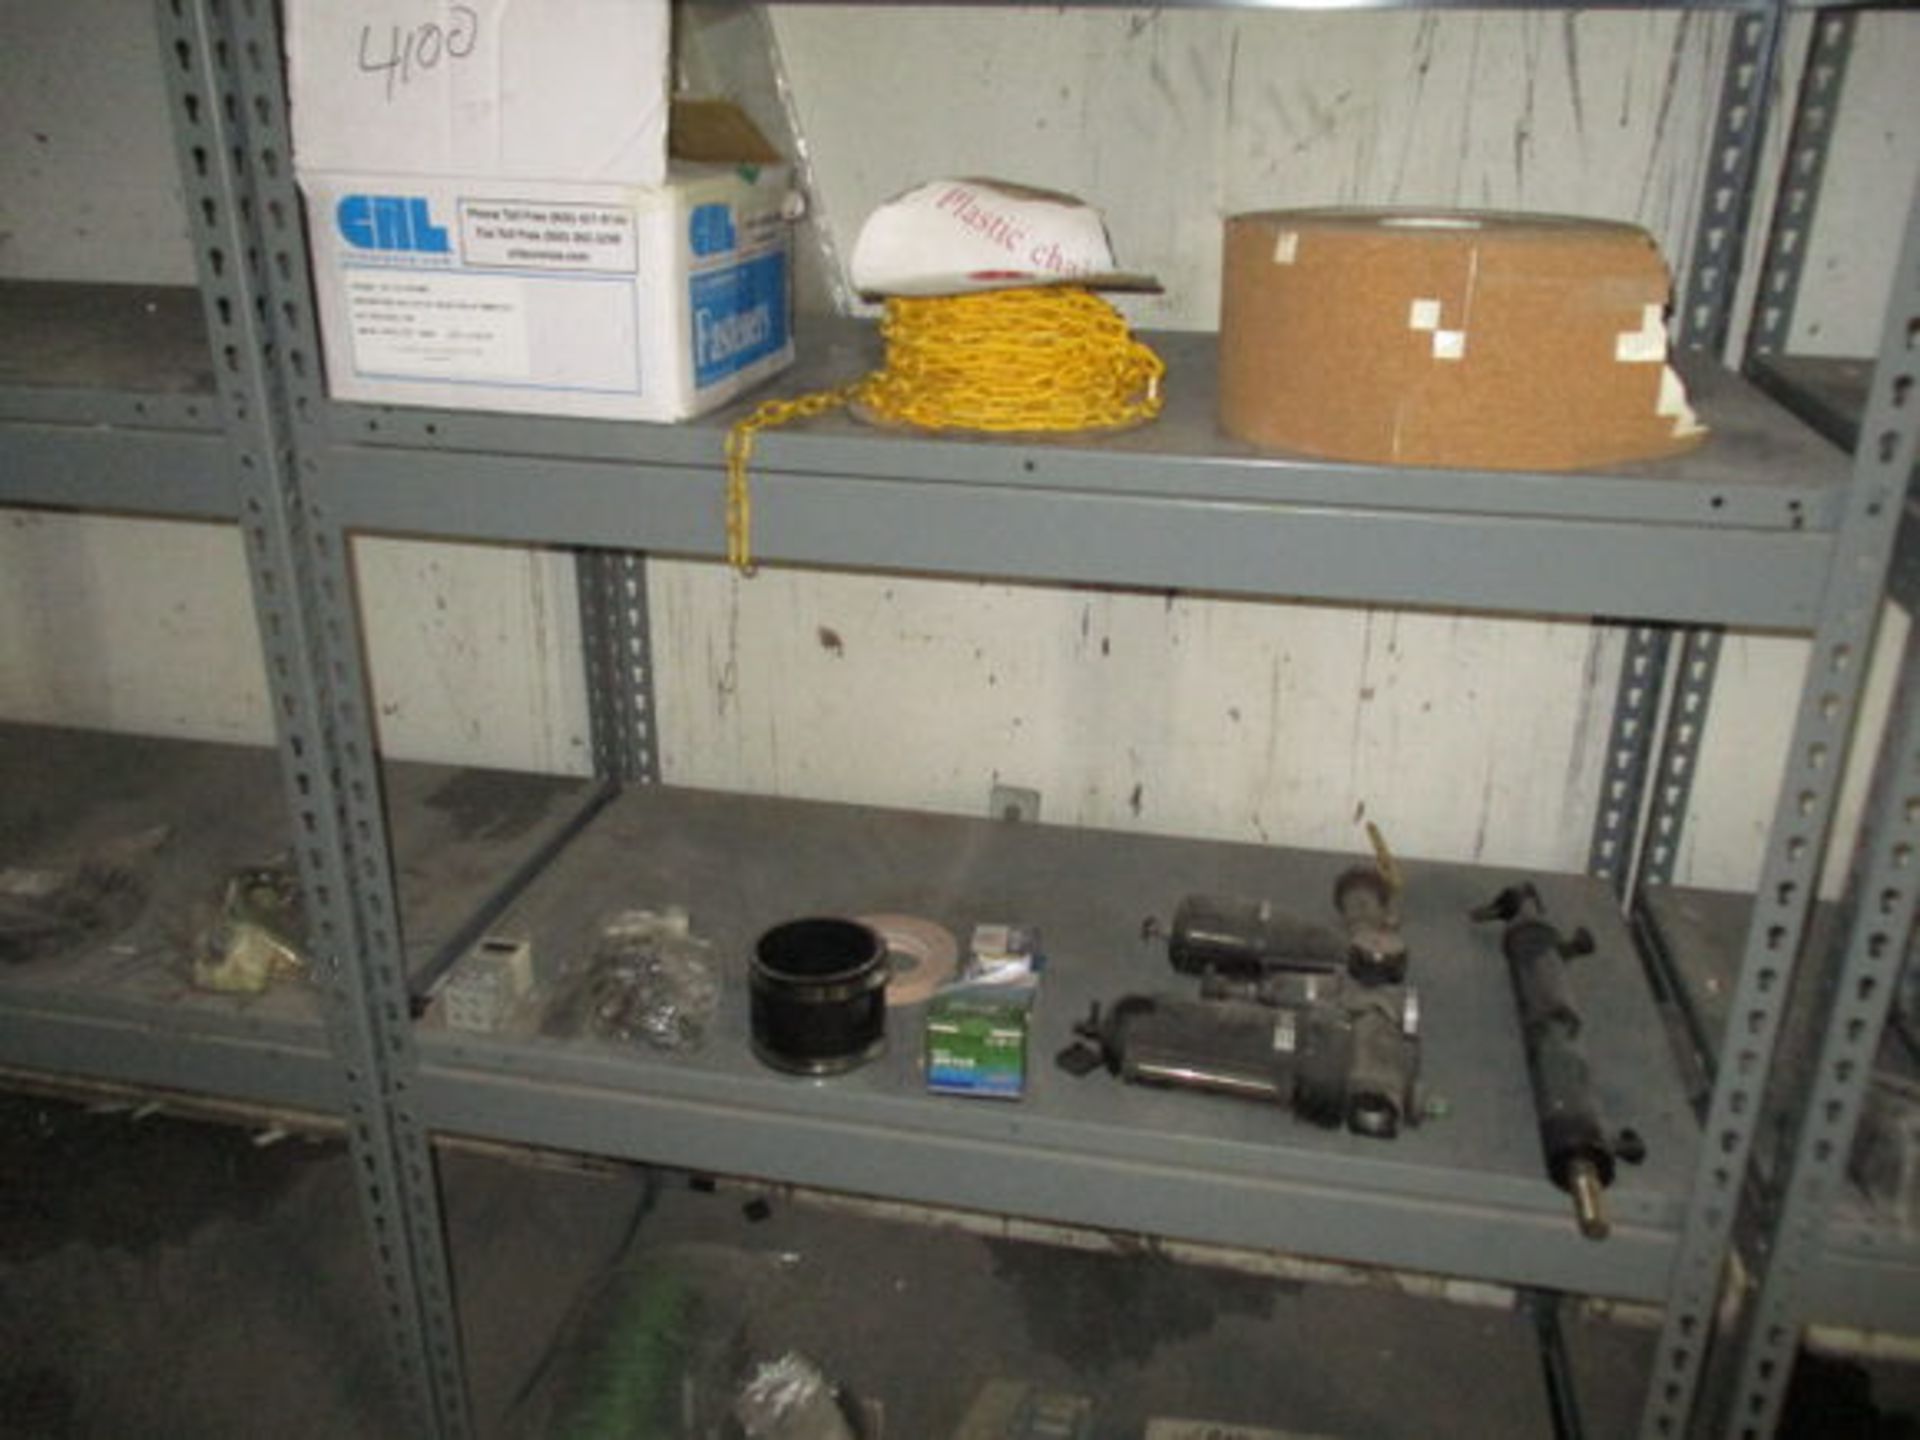 ASSORT TOOLS, PARTS W/ SHELVES IN (3) AREAS ALONG WALL - Image 10 of 10